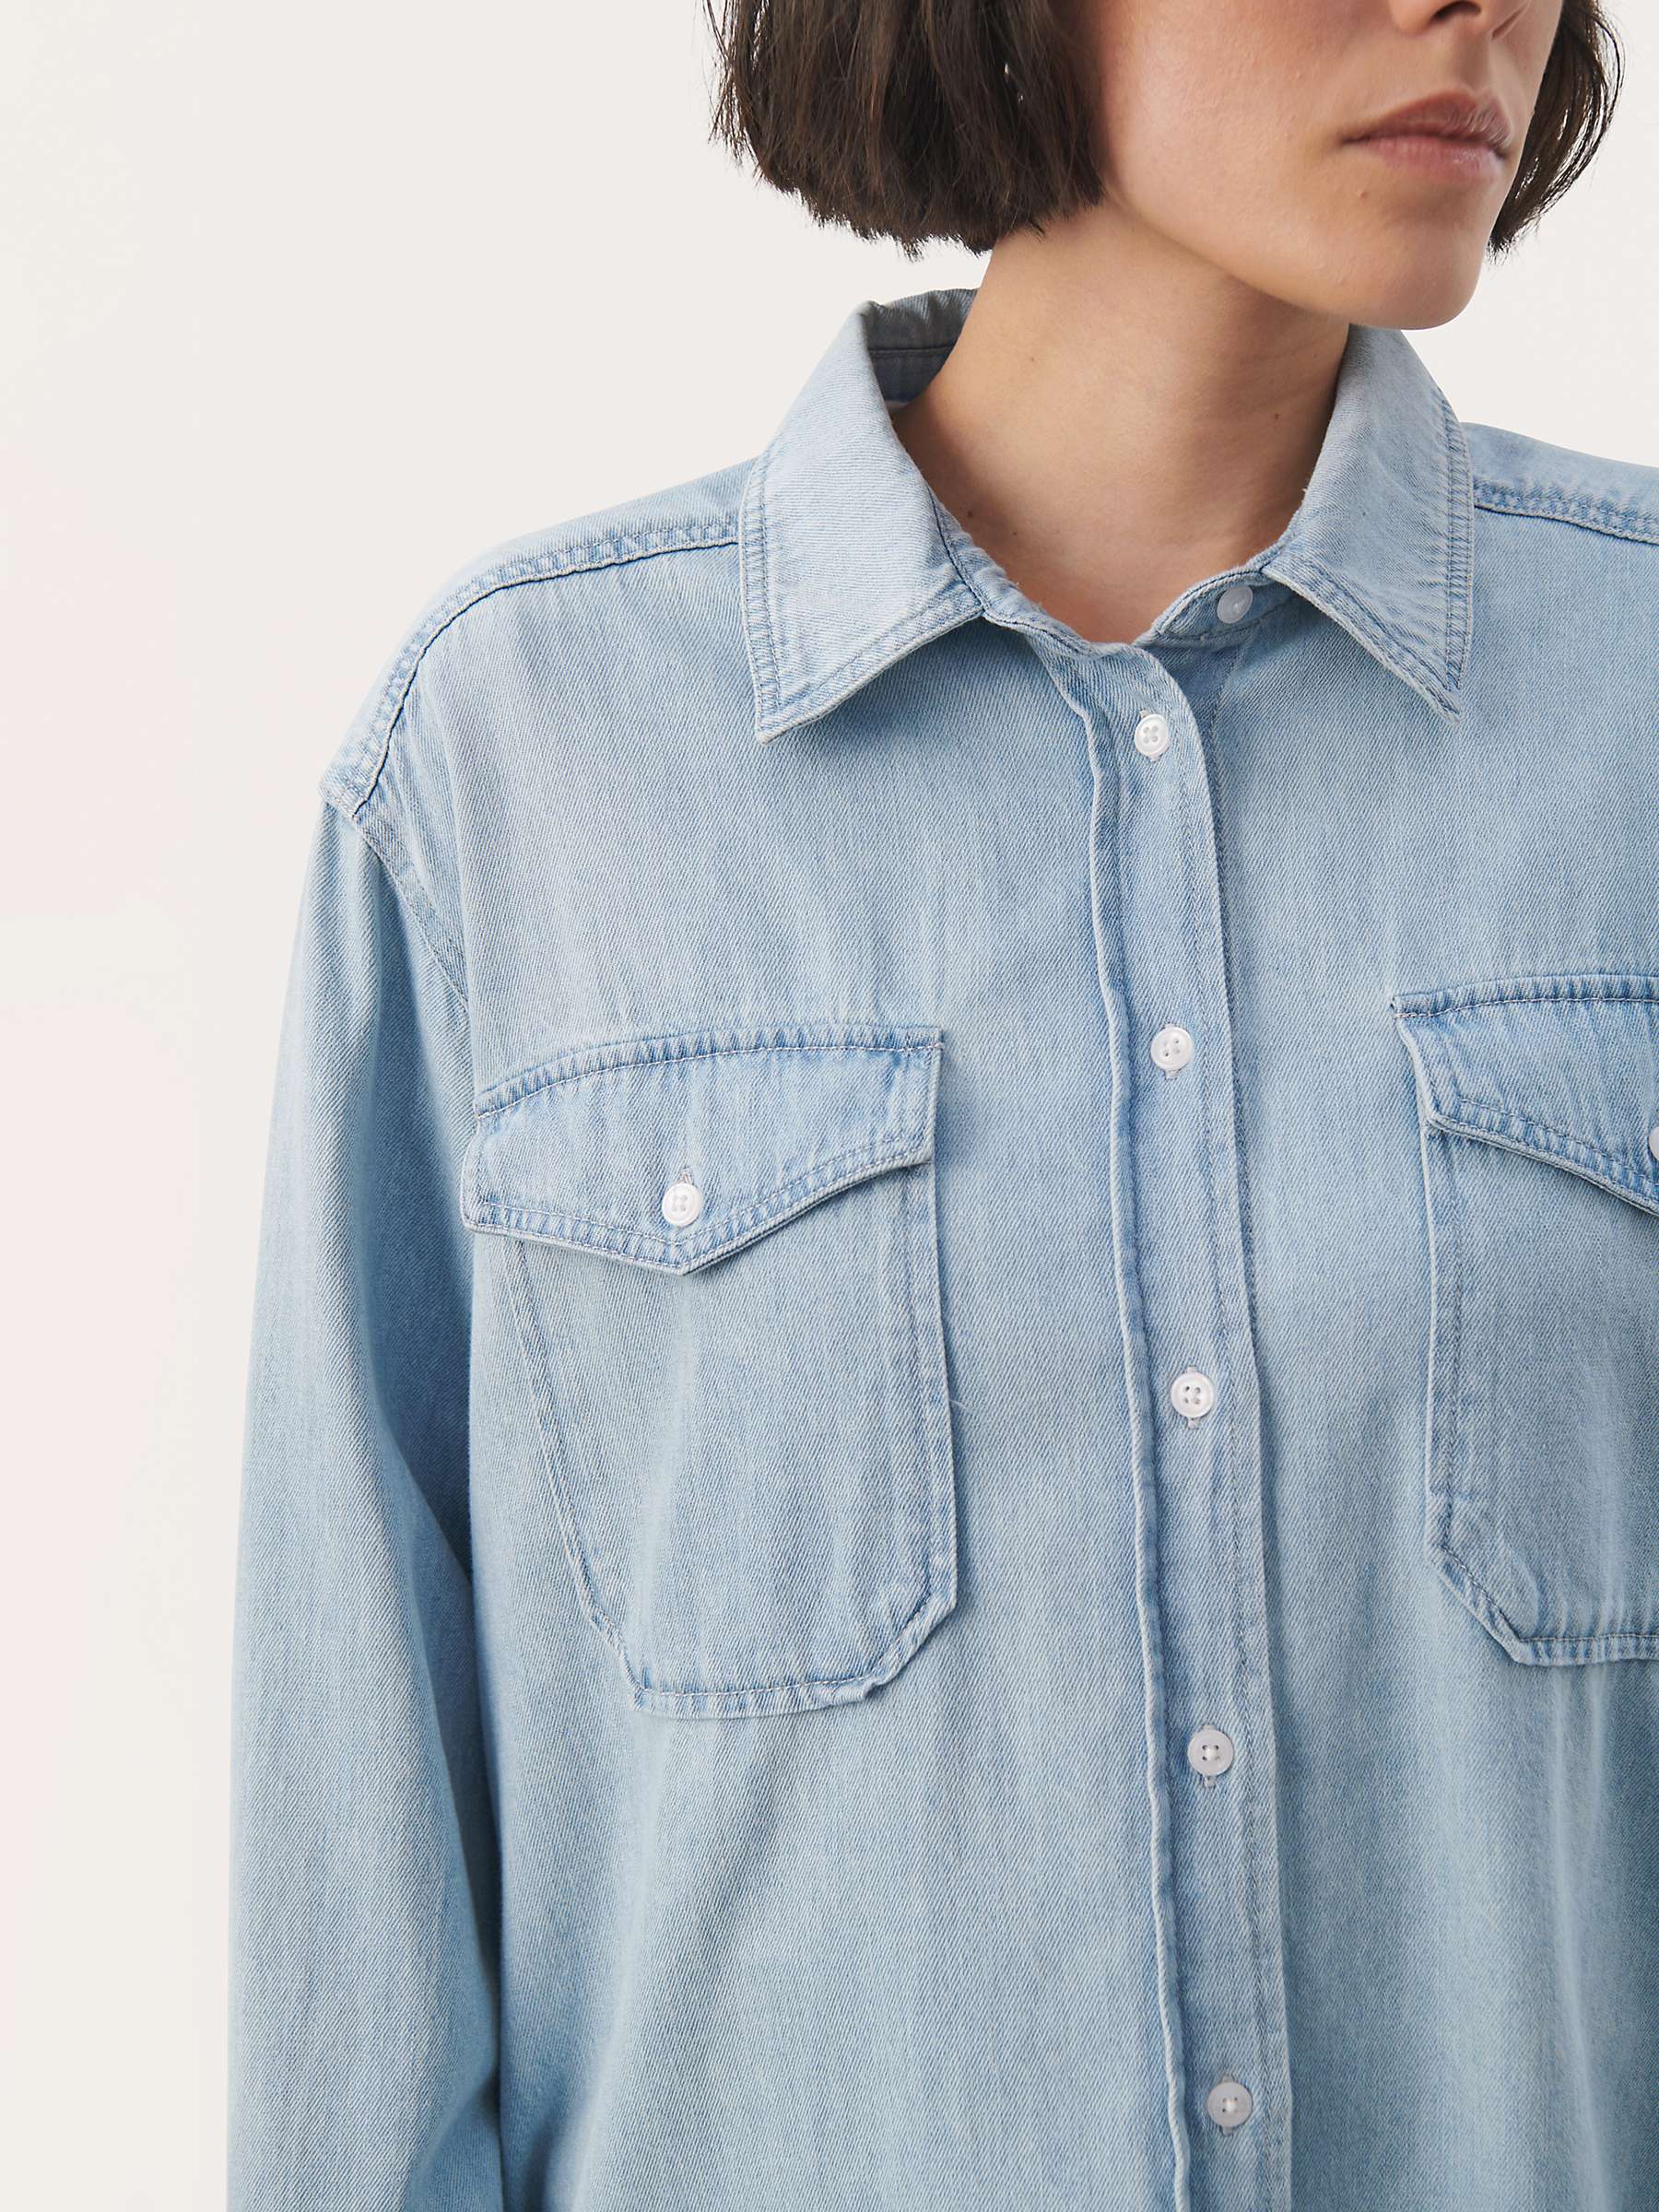 Buy Part Two Collette Long Sleeve Denim Shirt, Whiteish Blue Online at johnlewis.com